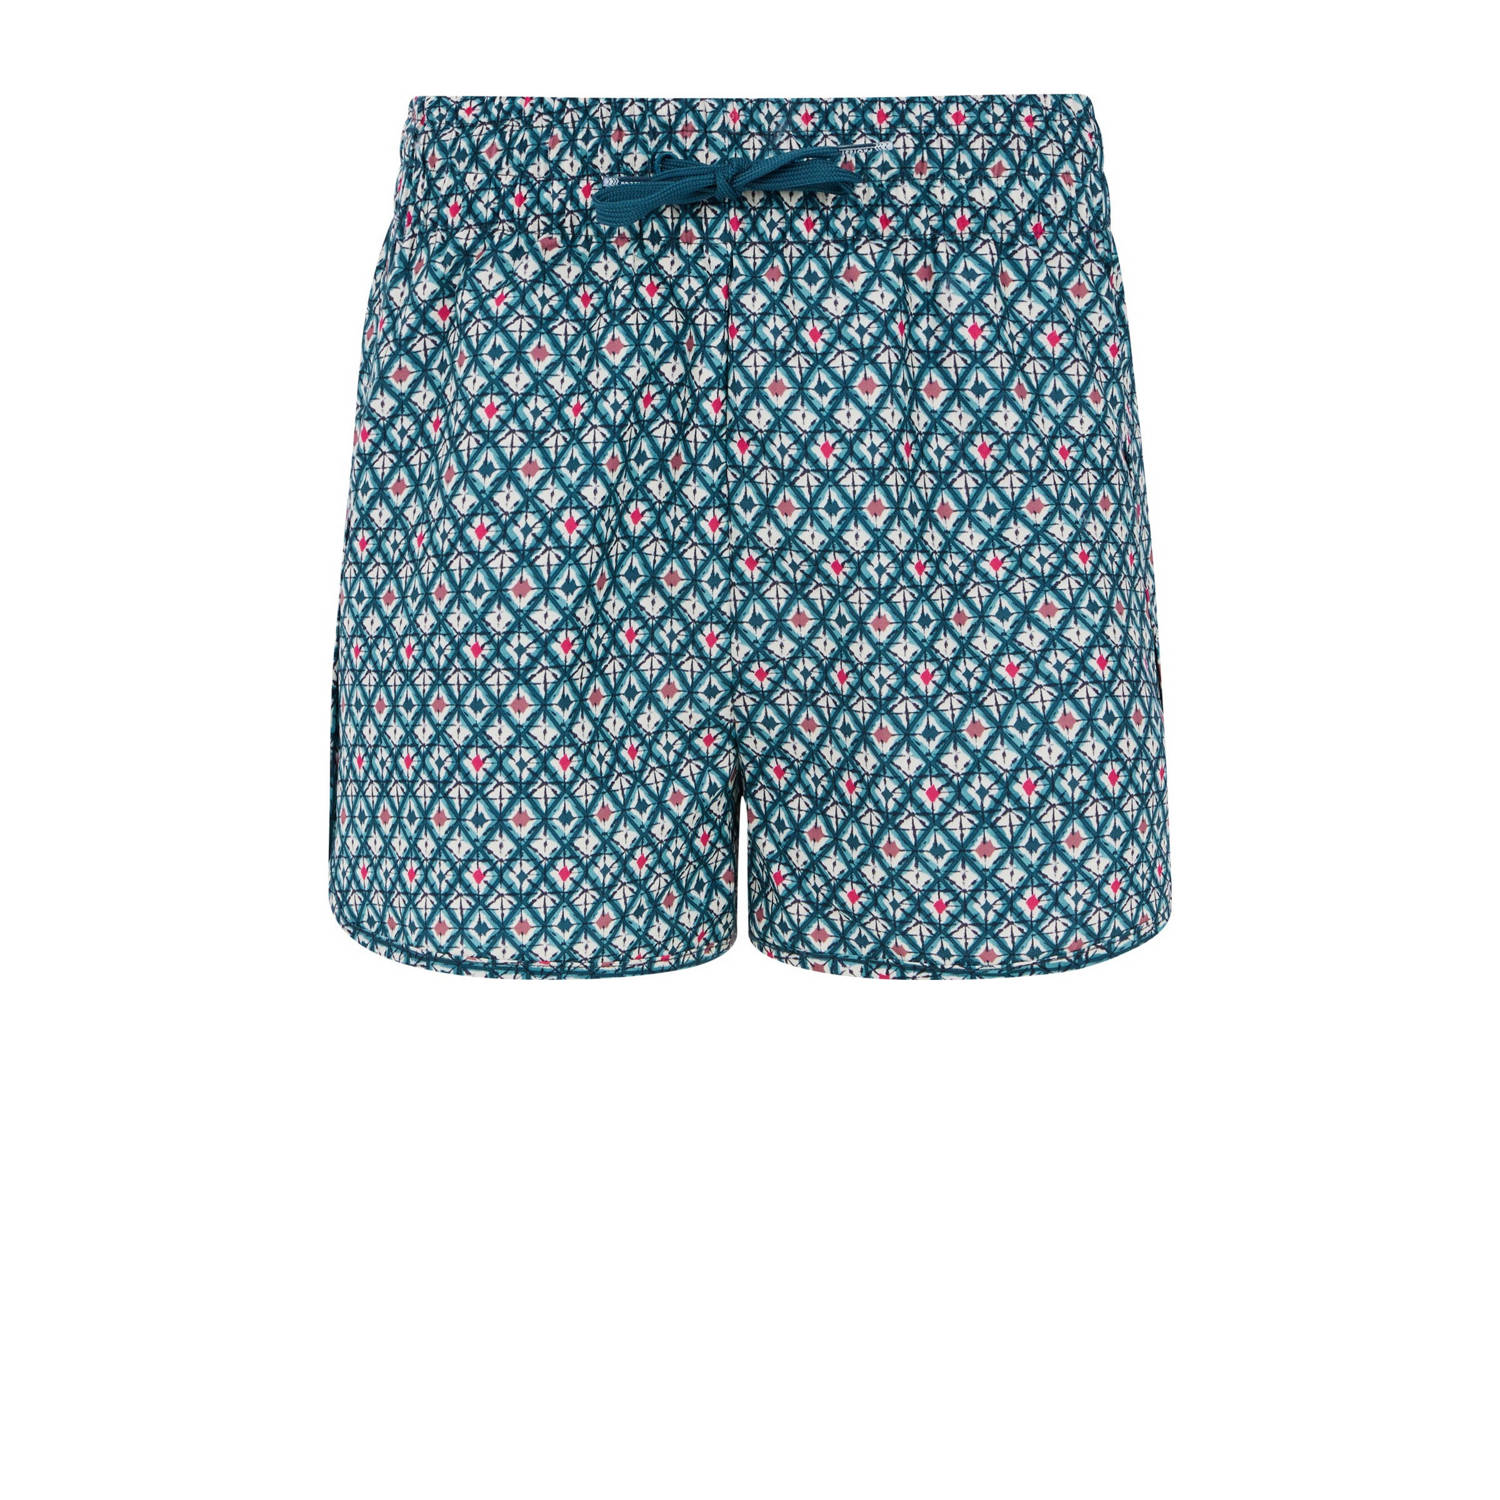 Protest casual short met all over print blauw wit rood